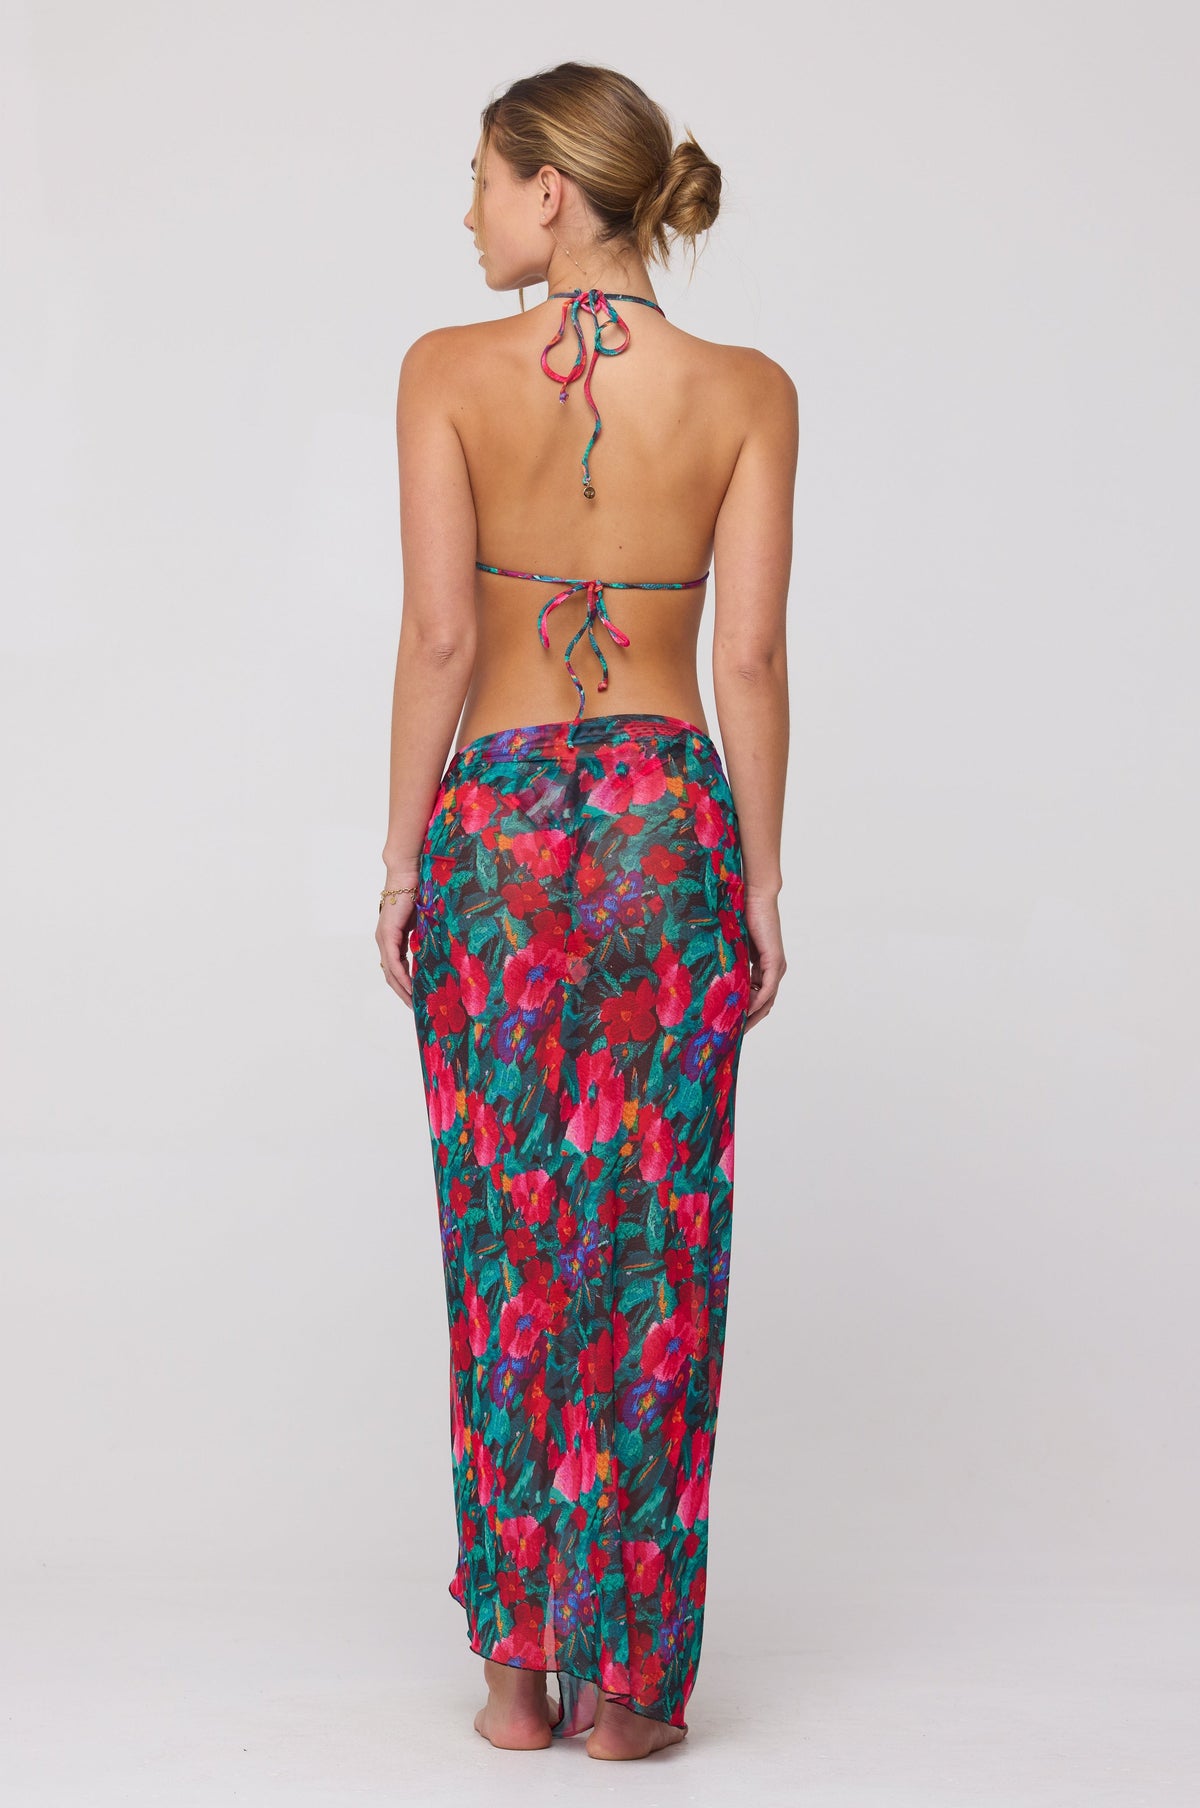 This is an image of Perfect Scarf Top and Sarong in Resort - RESA featuring a model wearing the dress